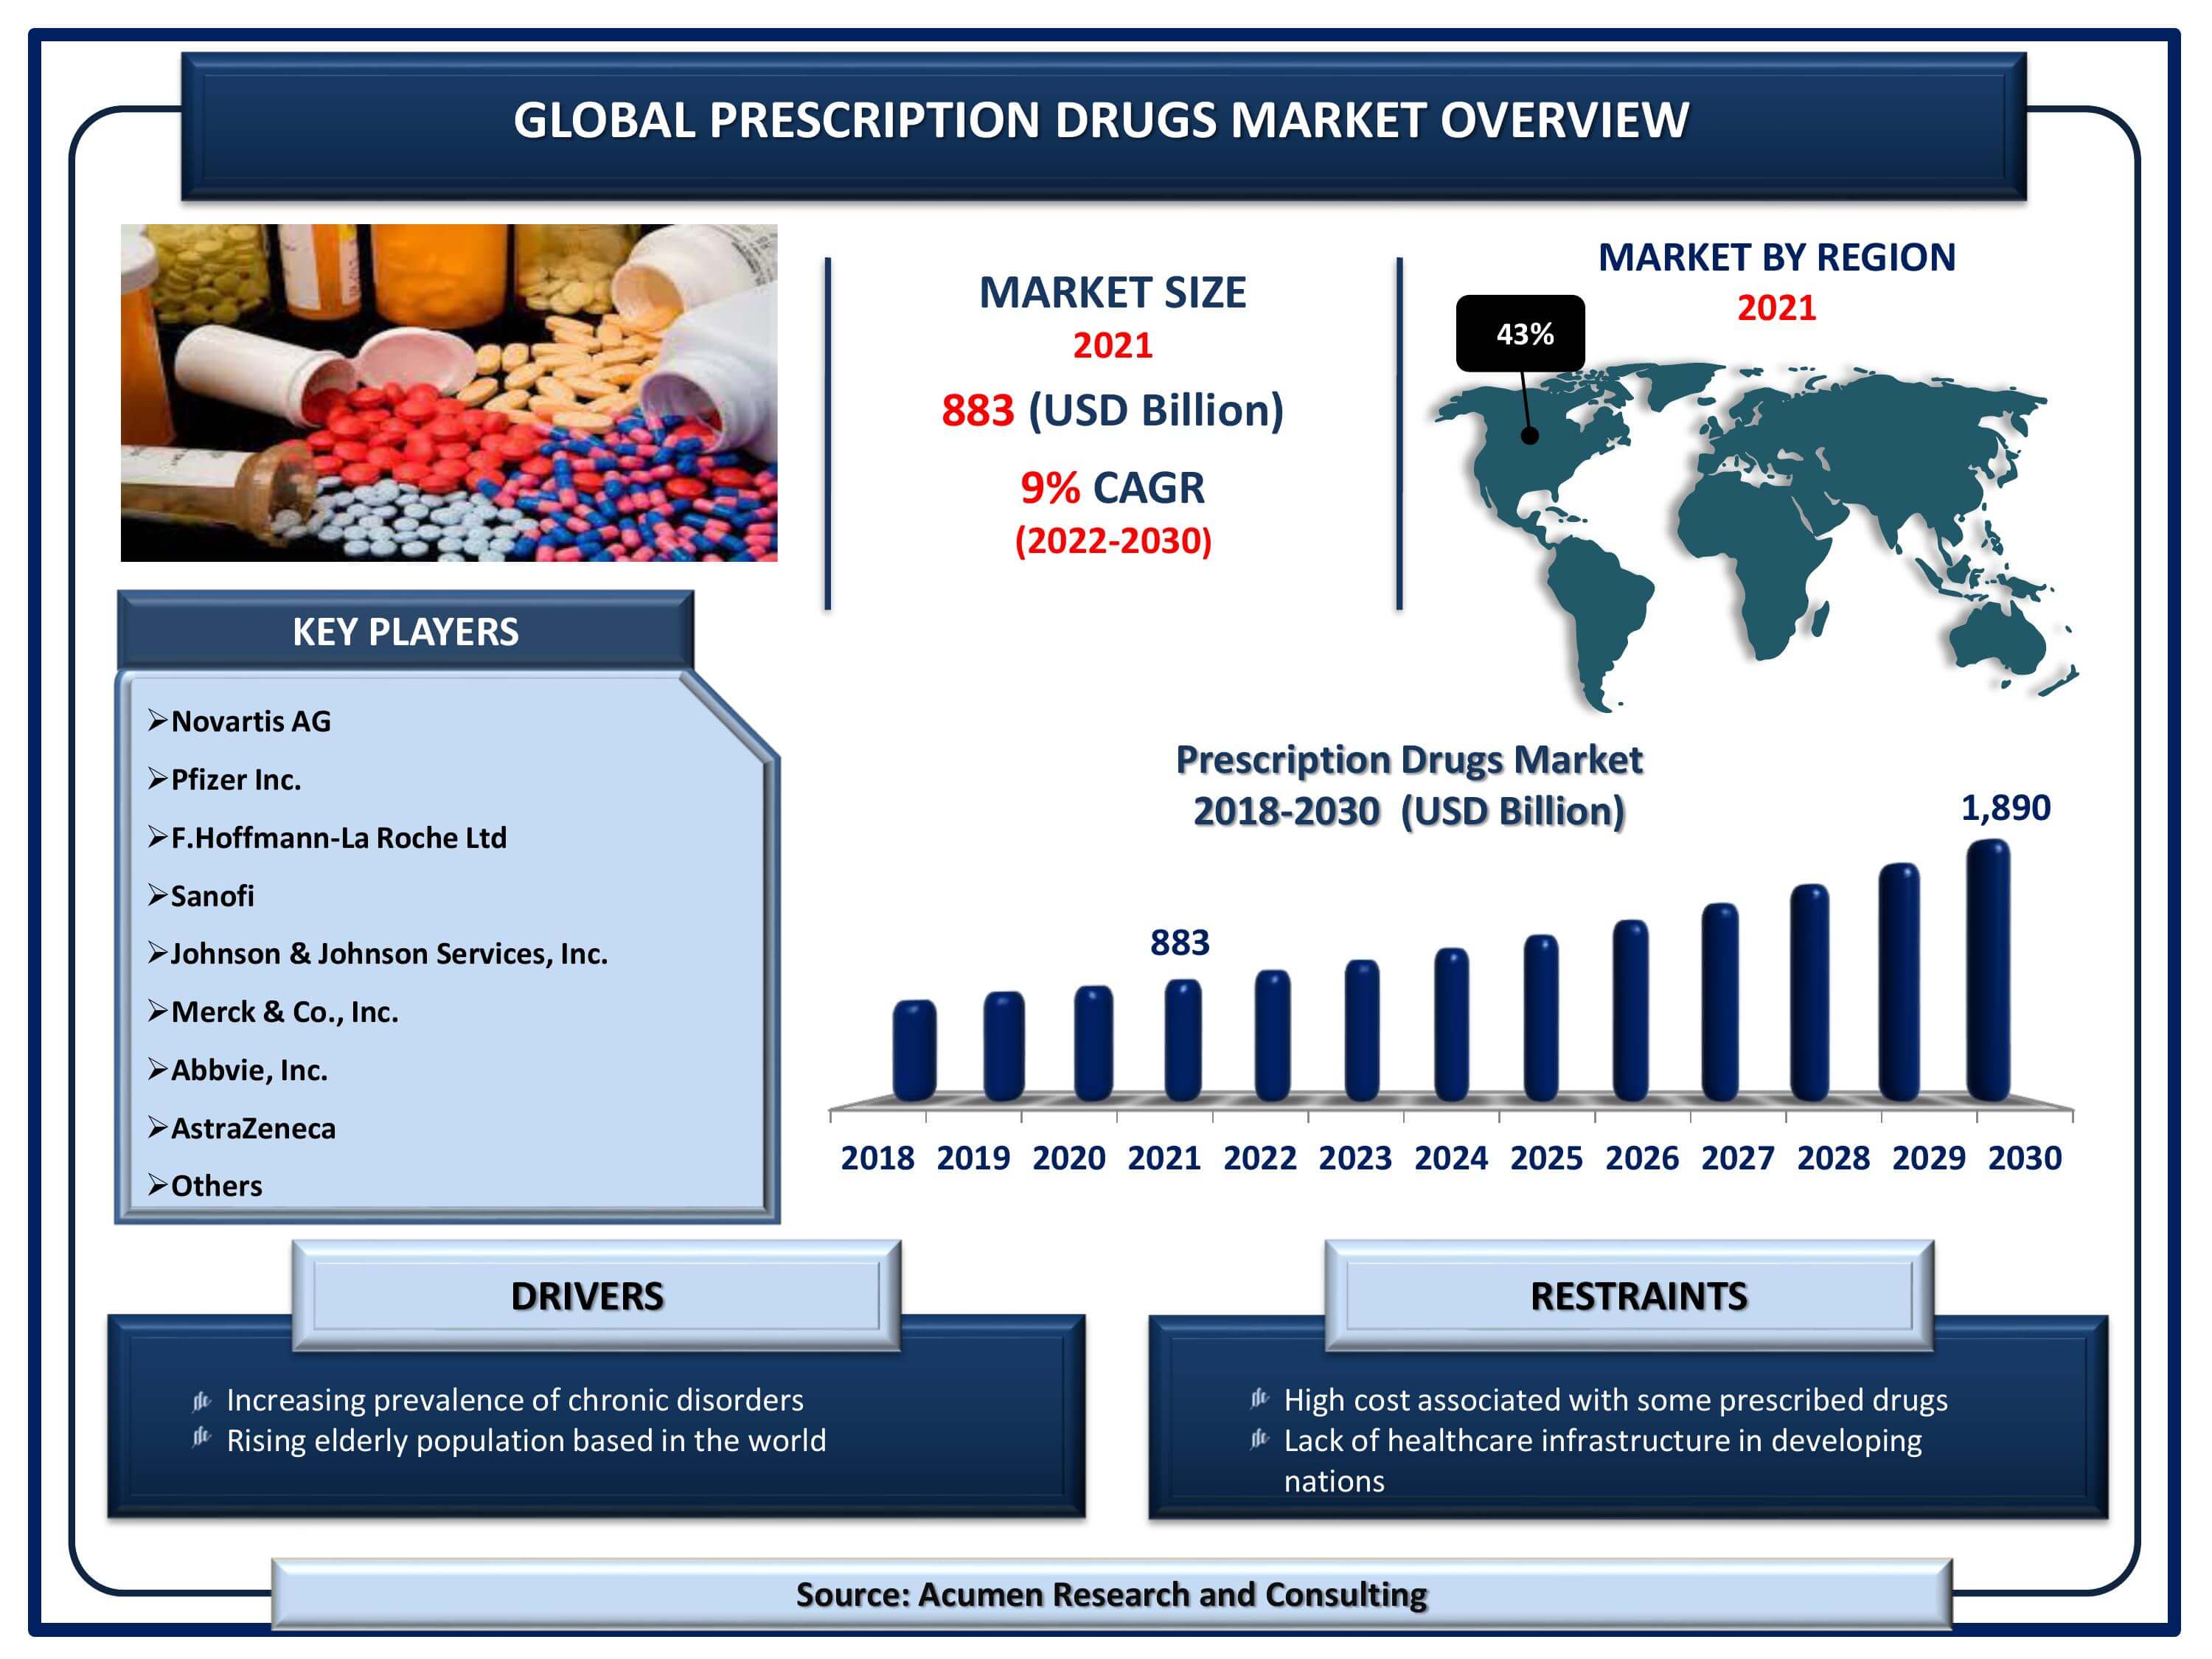 Global prescription drugs market revenue is estimated to reach USD 1,890 Million by 2030 with a CAGR of 9% from 2022 to 2030